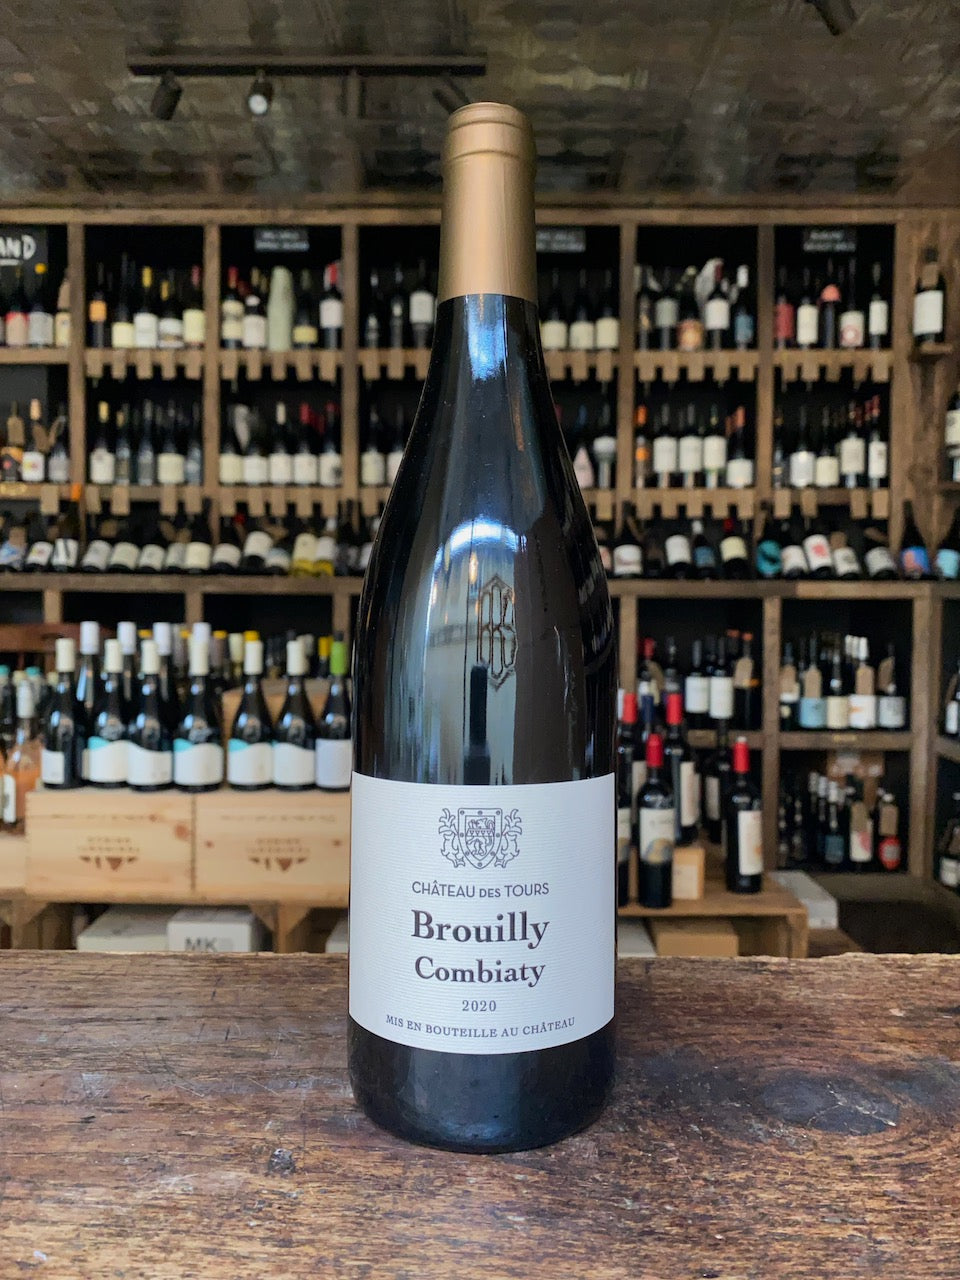 Brouilly Combiaty, Chateau des Tours, 2020